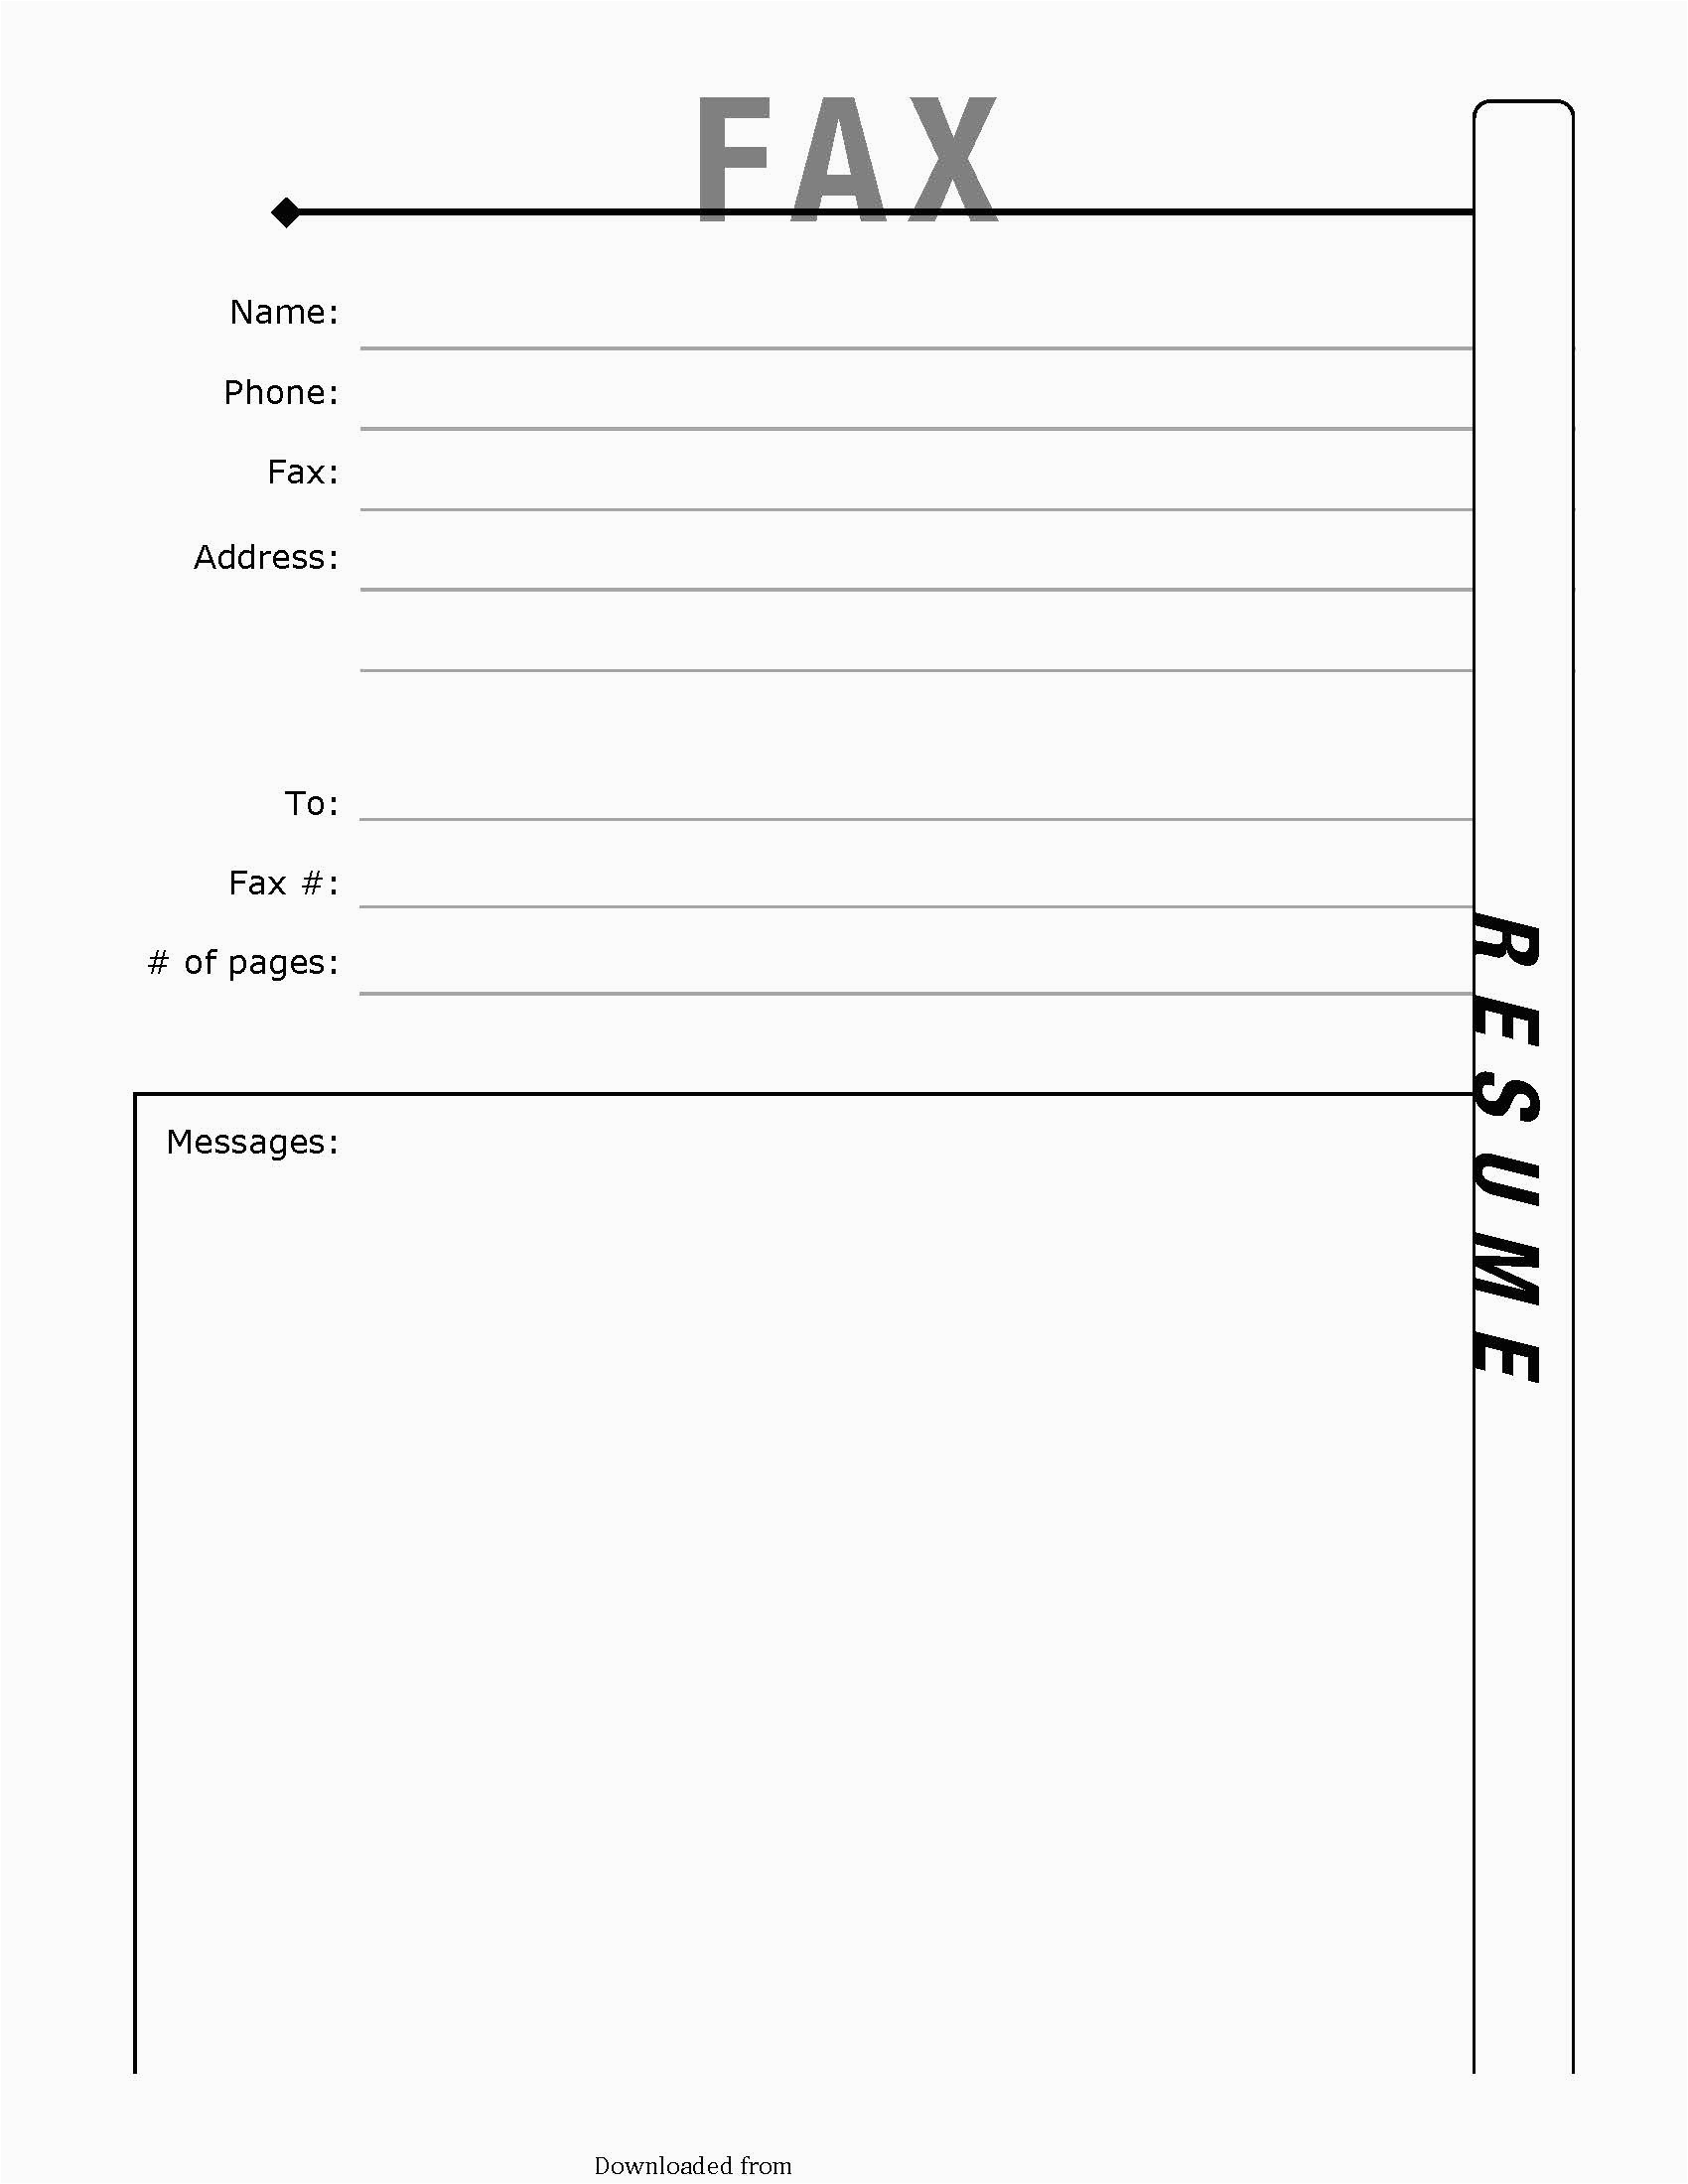 fax cover sheet for resume 3